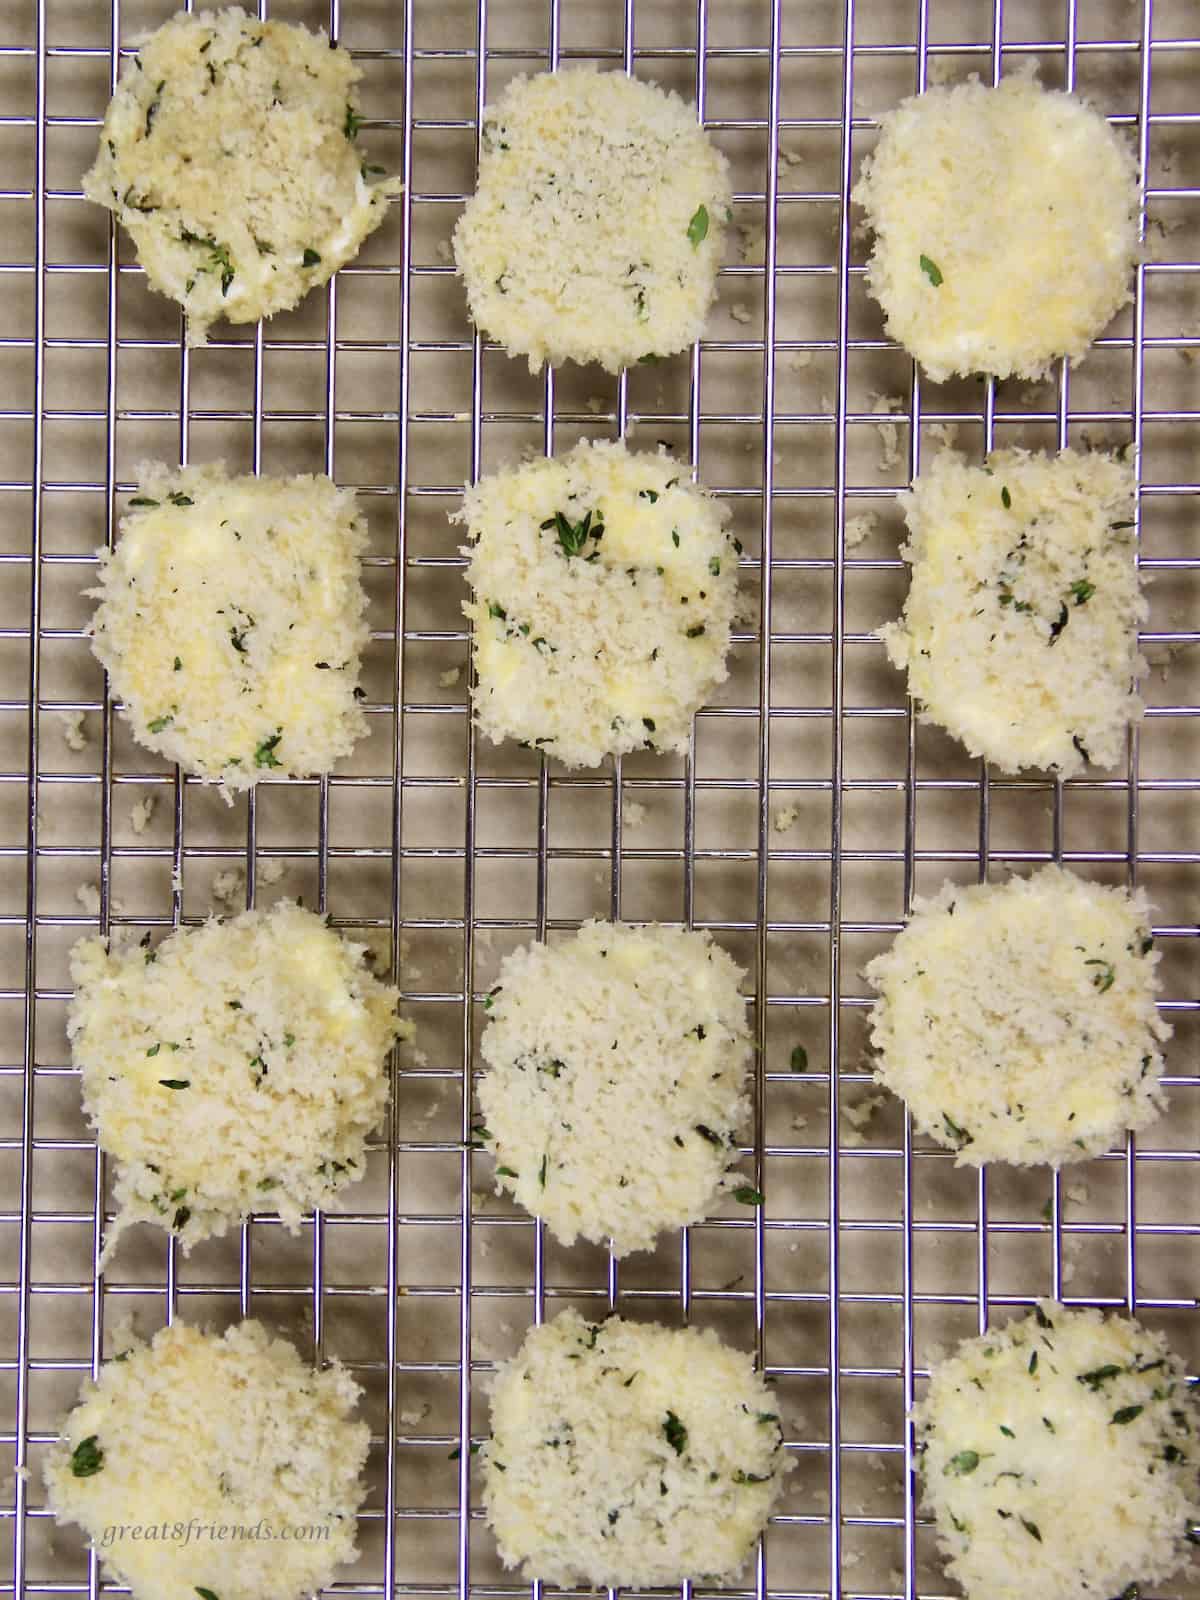 Baking rack with goat cheese rounds covered with bread crumbs and thyme.